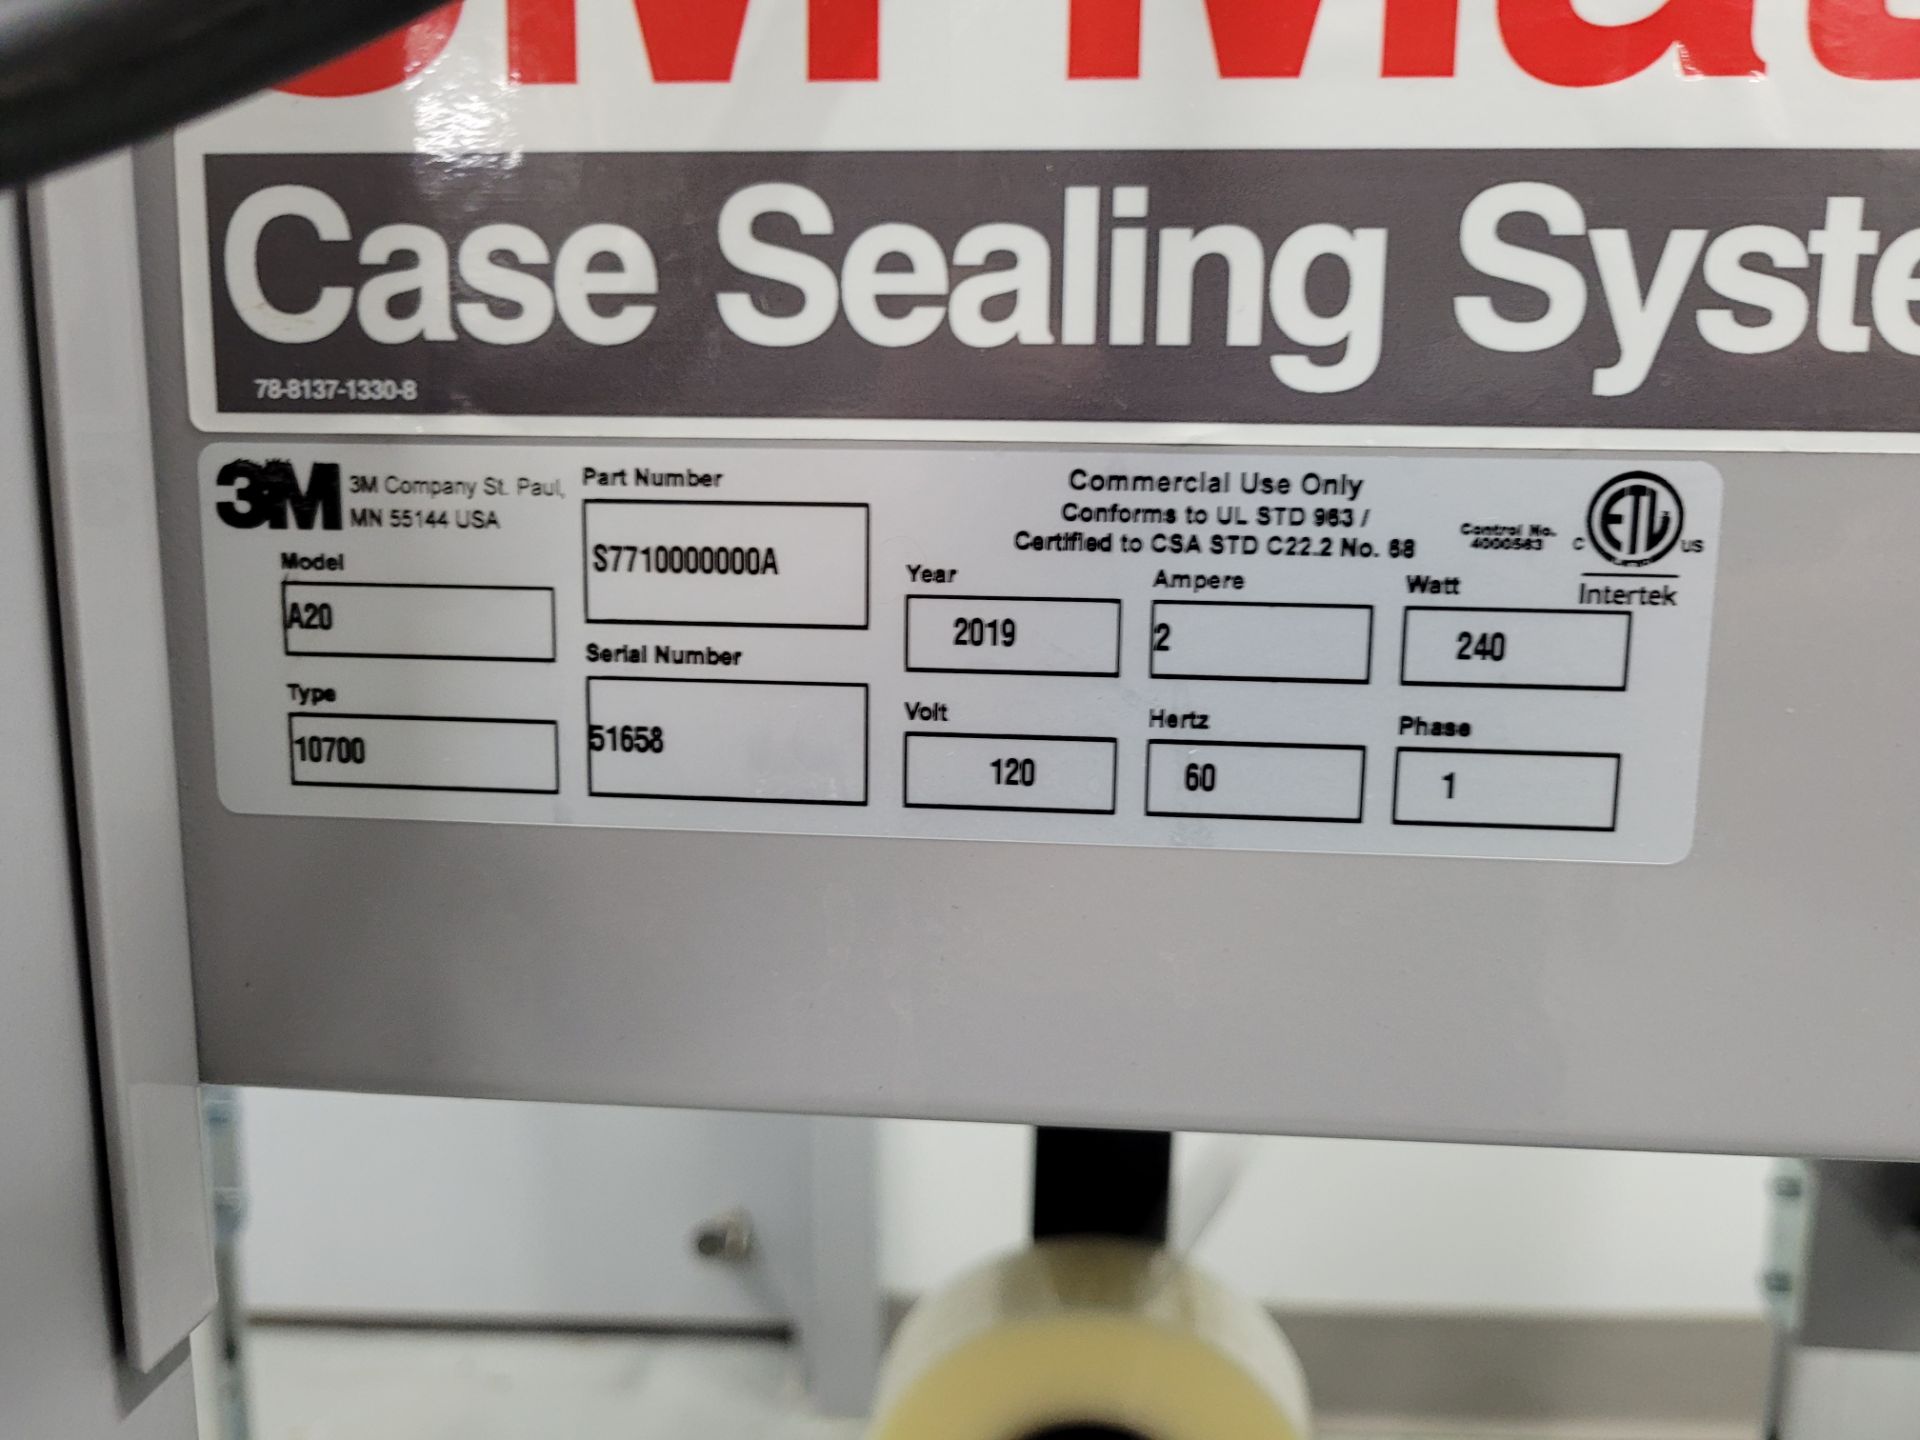 2019 3M Case Sealing System mod. A20 - Image 8 of 10